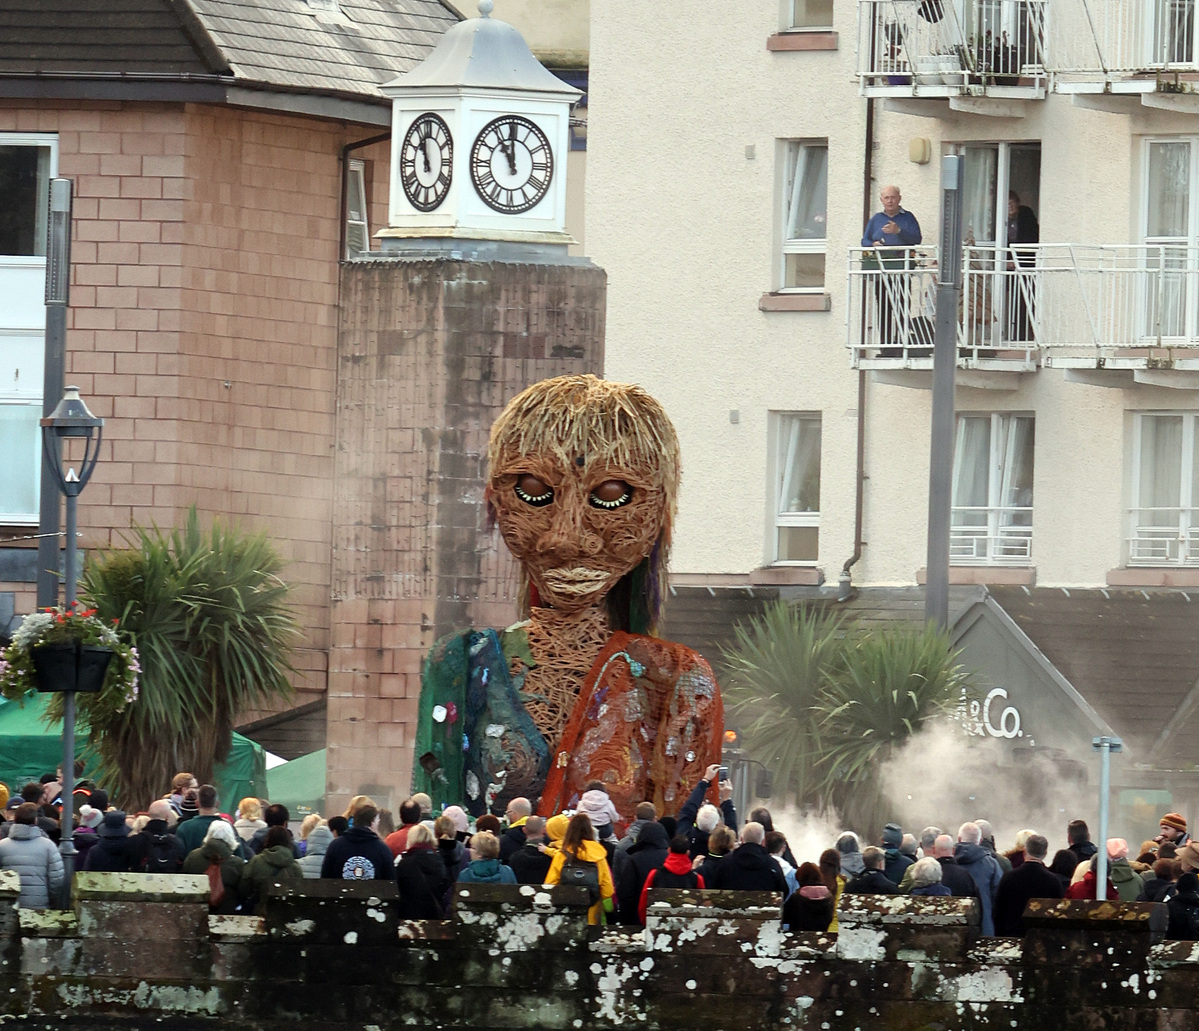 Giant puppet takes Oban by storm